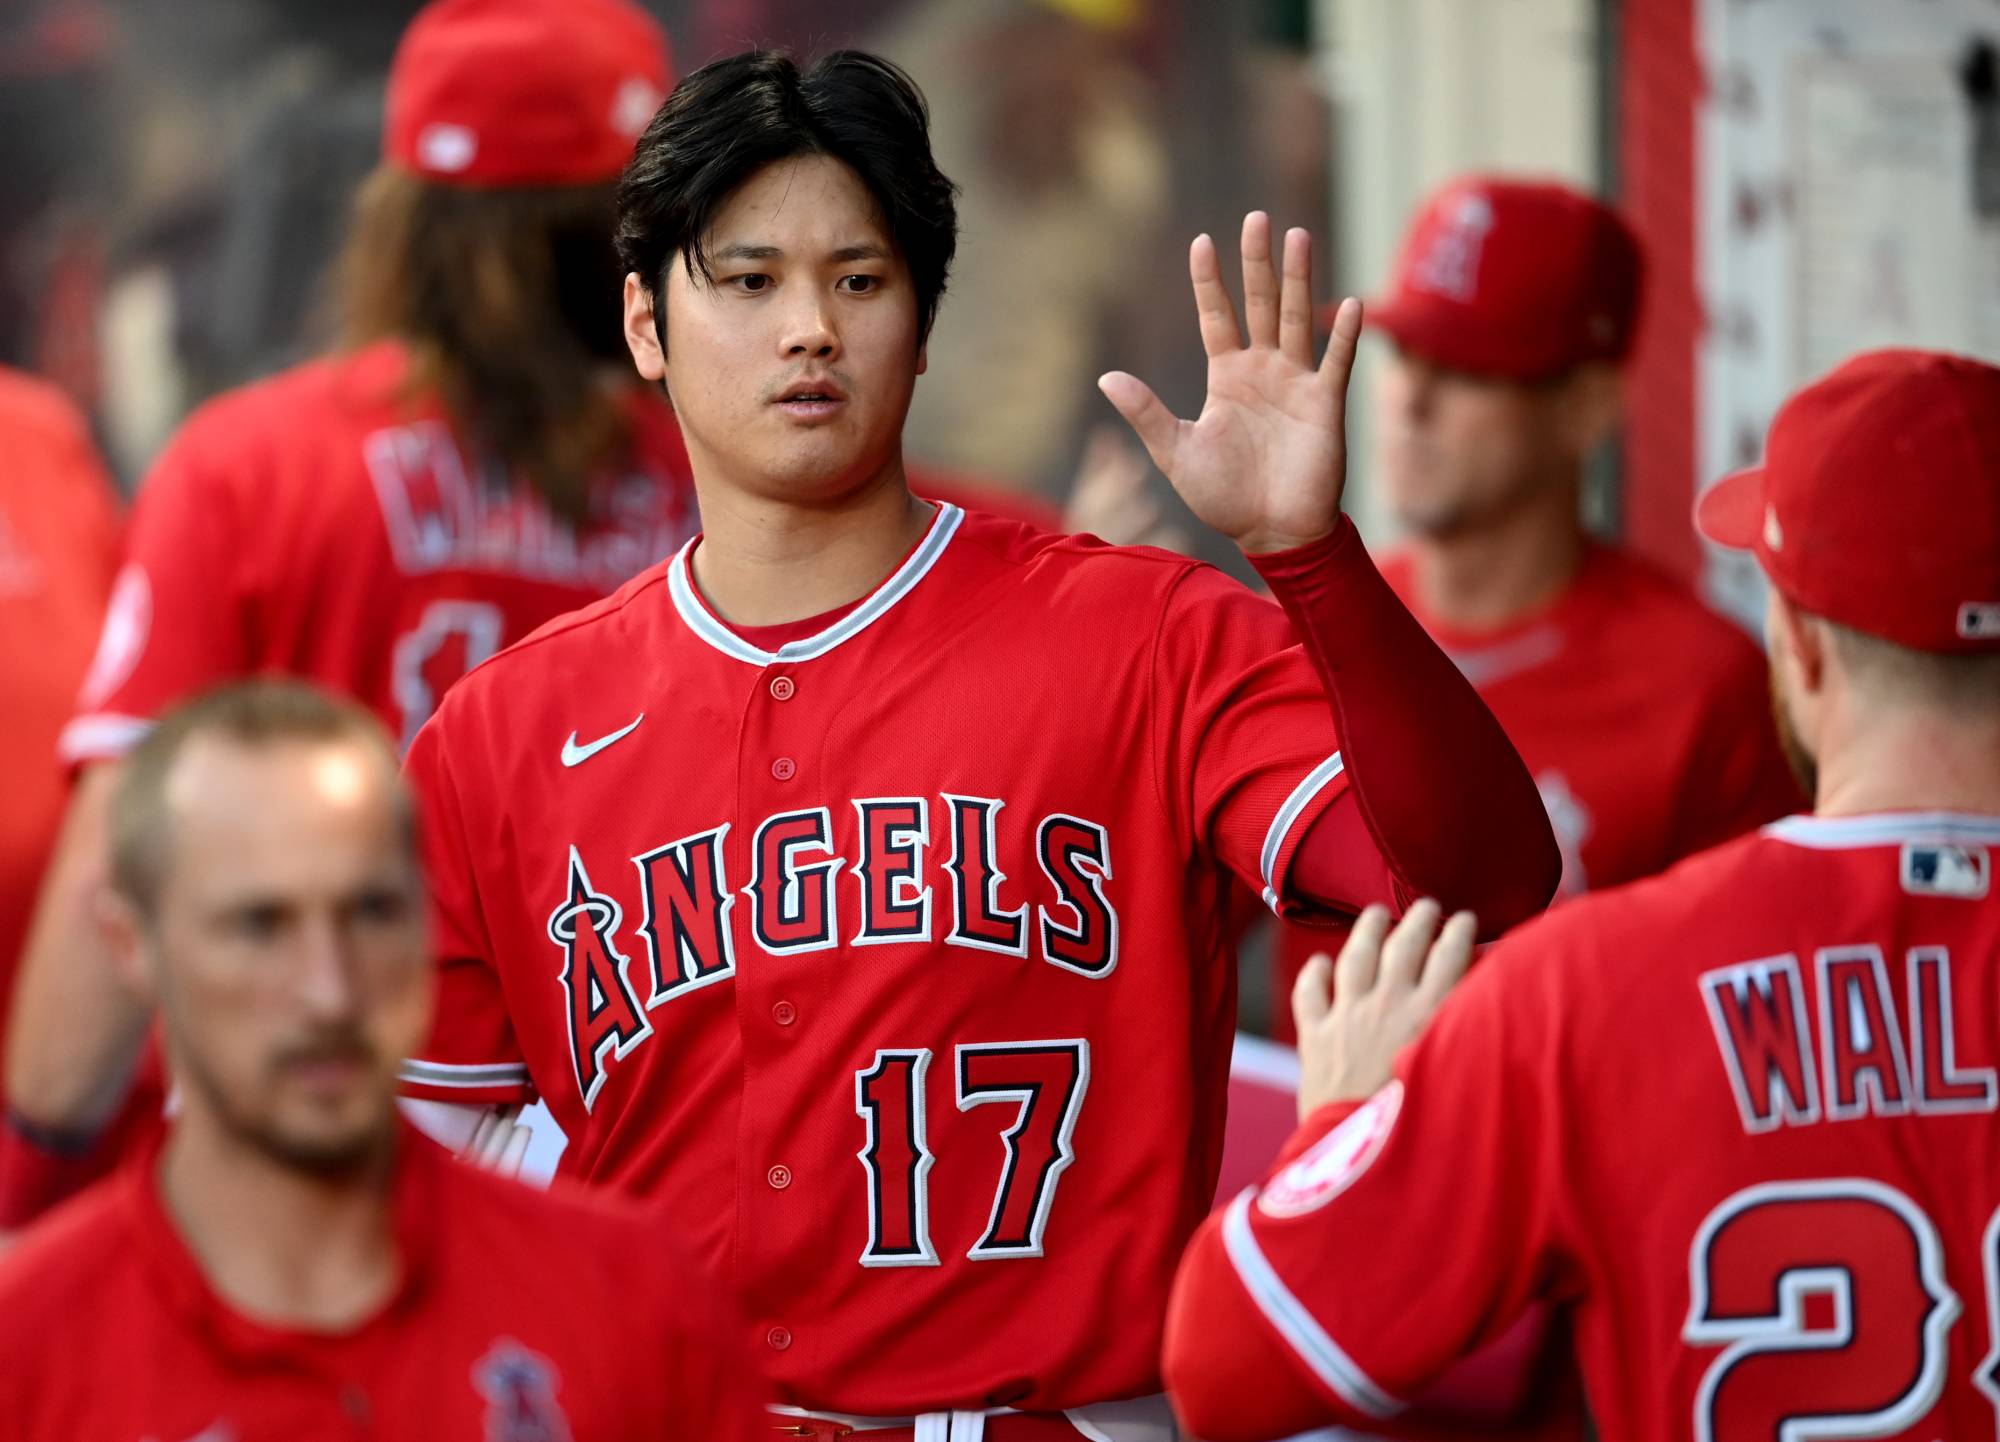 Official official Ohtani MVP Los Angeles Angels Stadium team shirt